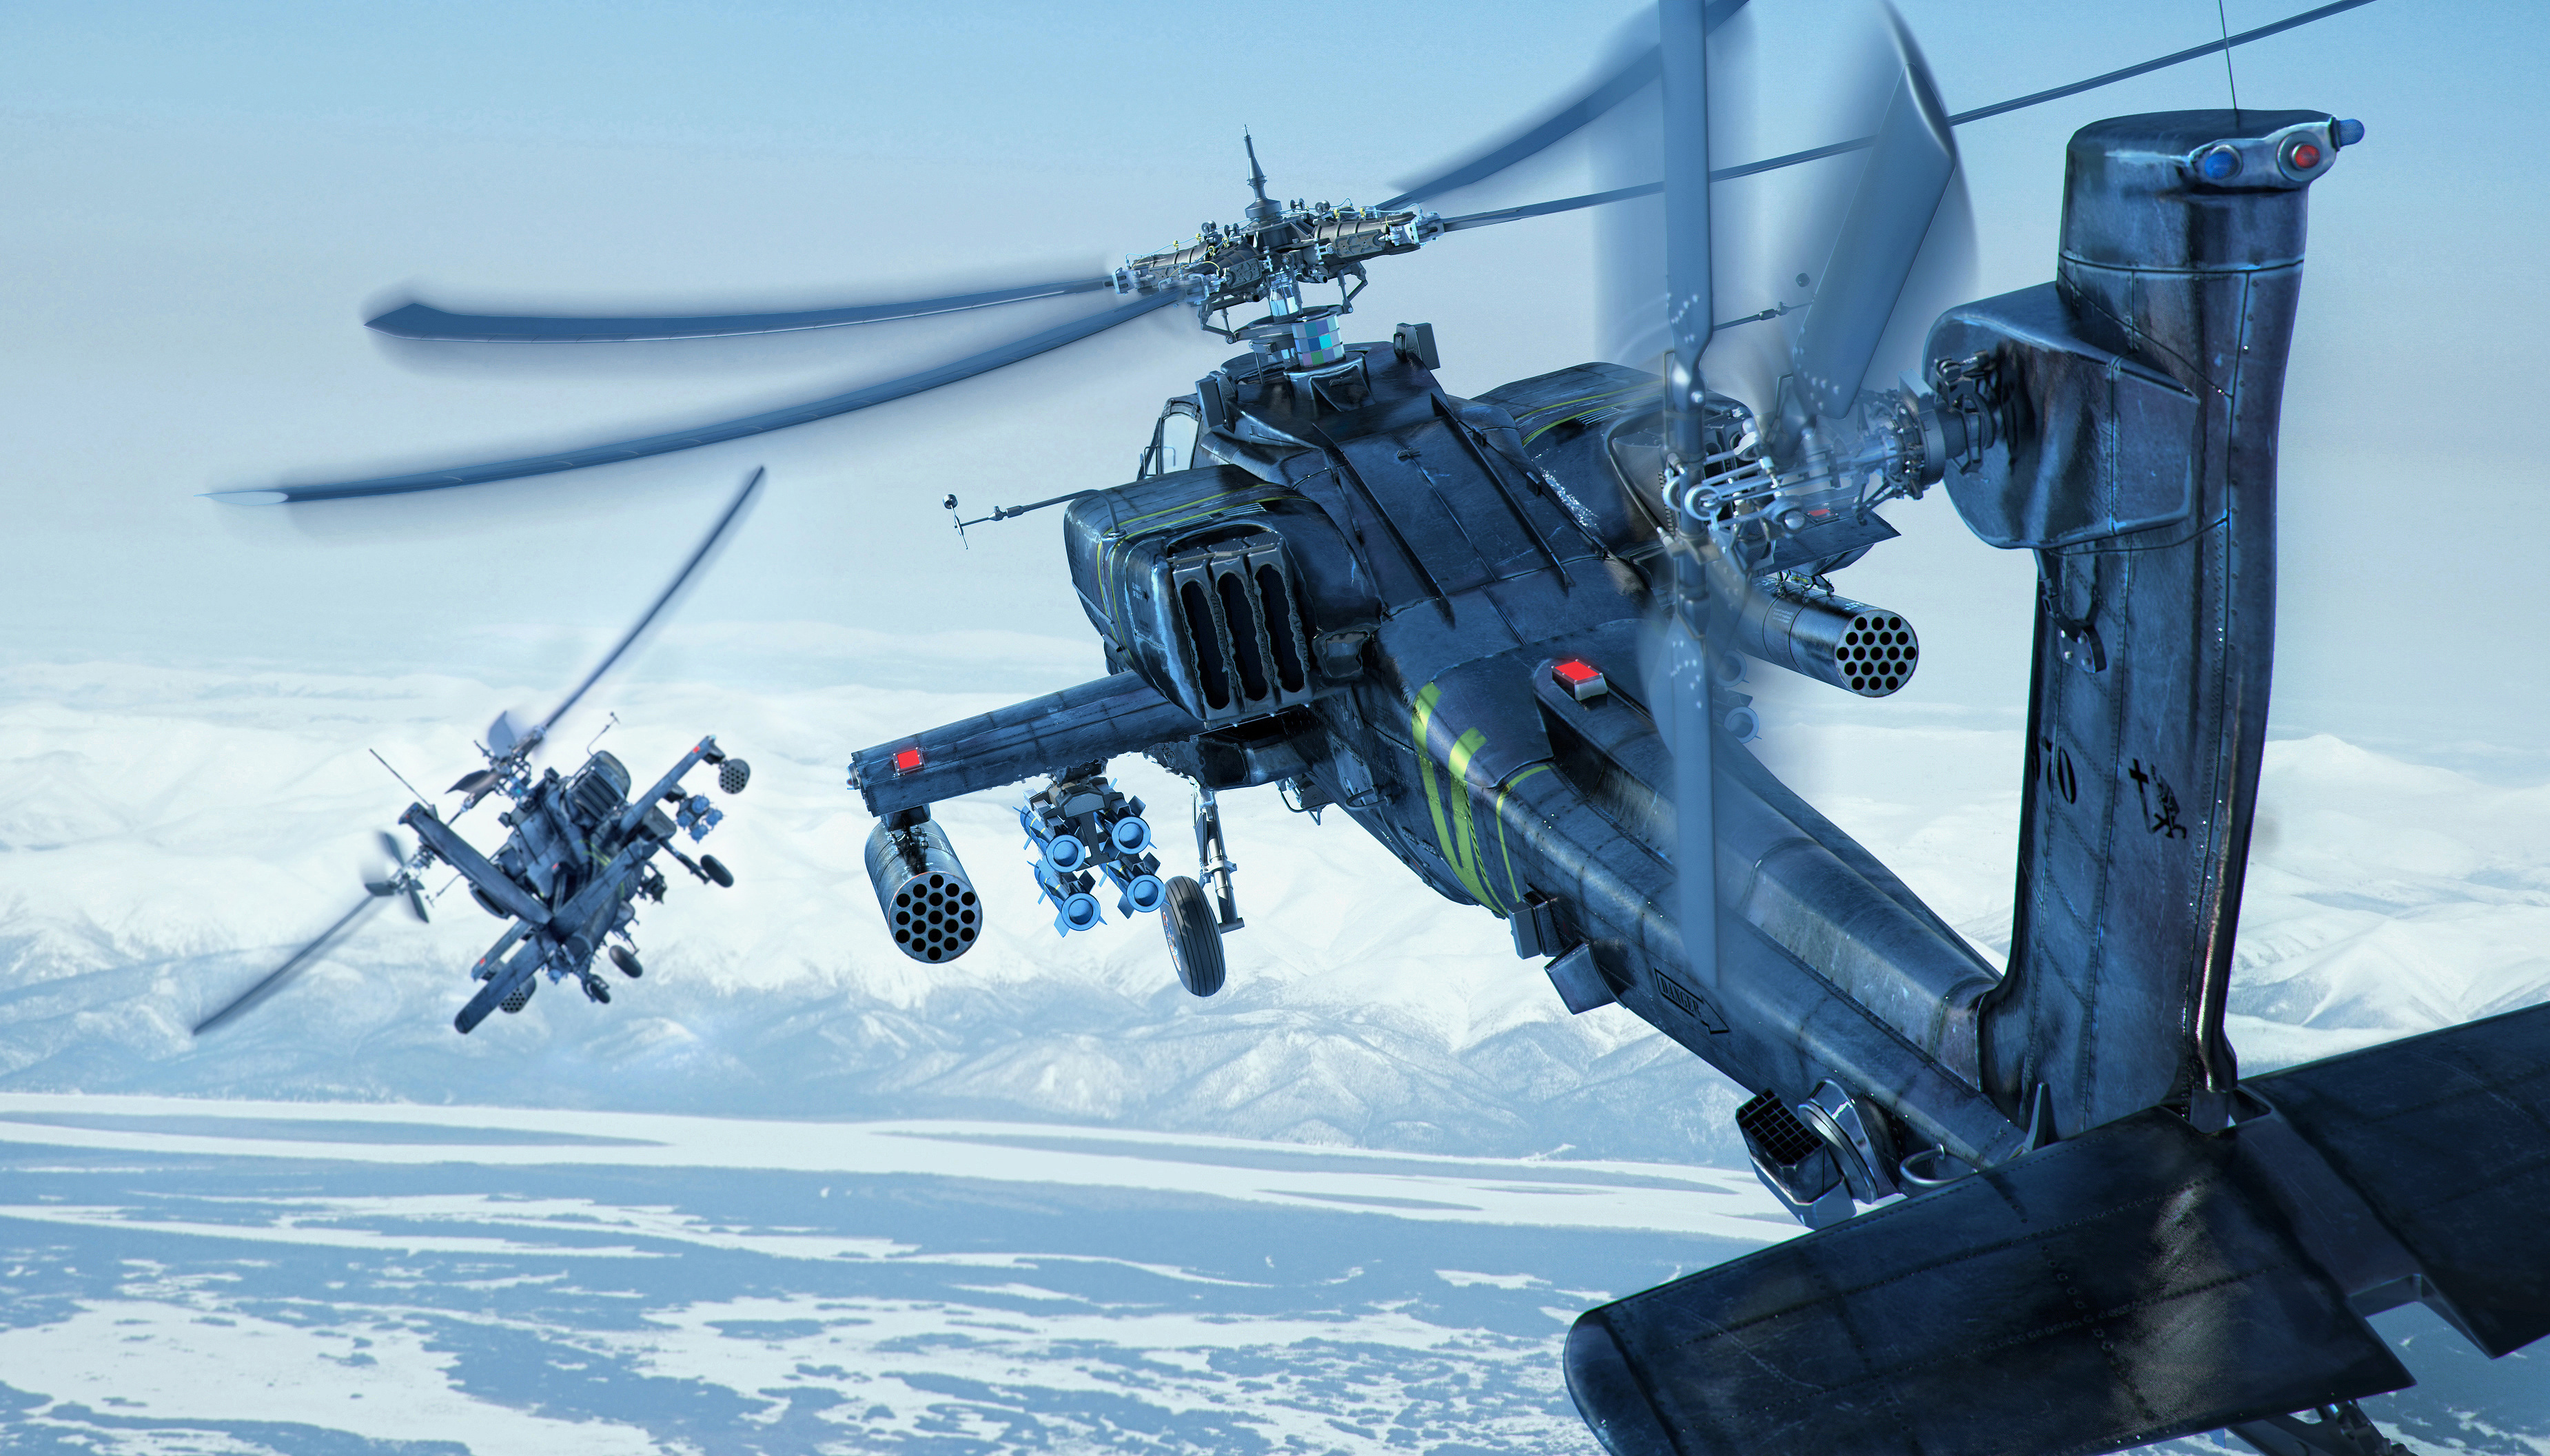 Helicopter Wallpaper High Resolution HD Site